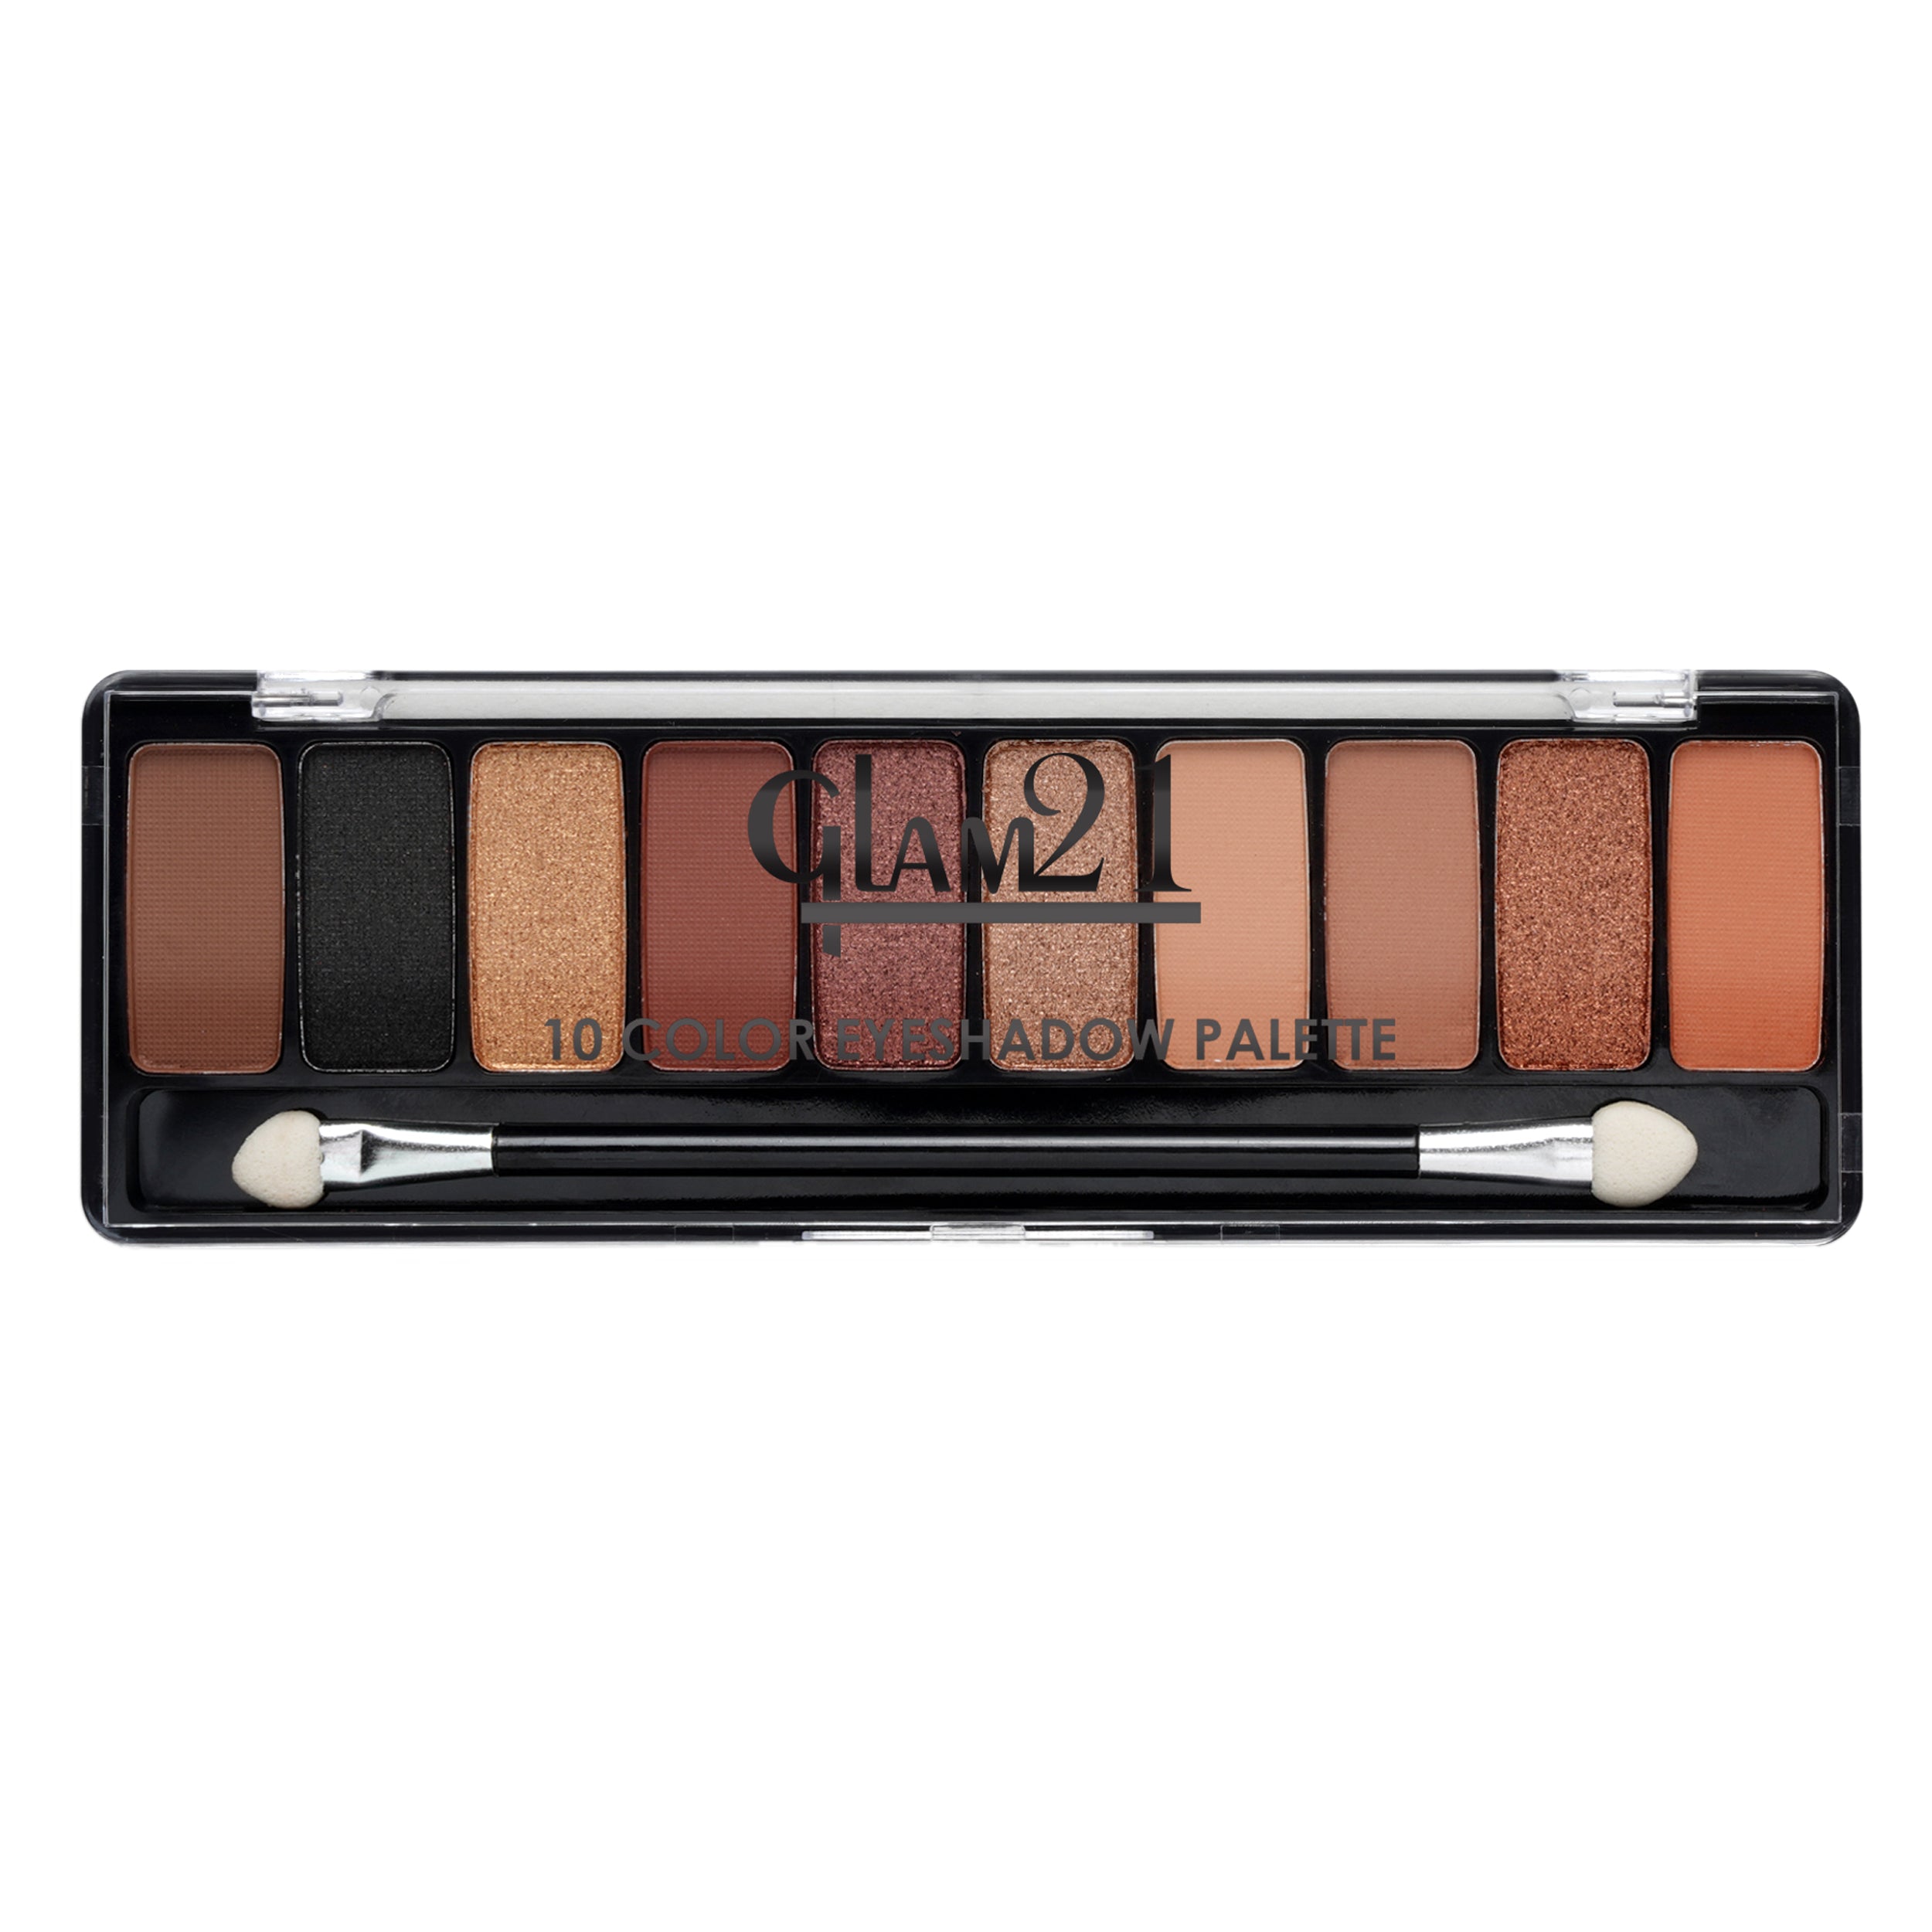 Glam21 10 Color Eyeshadow Palette - Soft Matte & Creamy Shimmer in Just One Swipe 8.8 g (Shade-01)